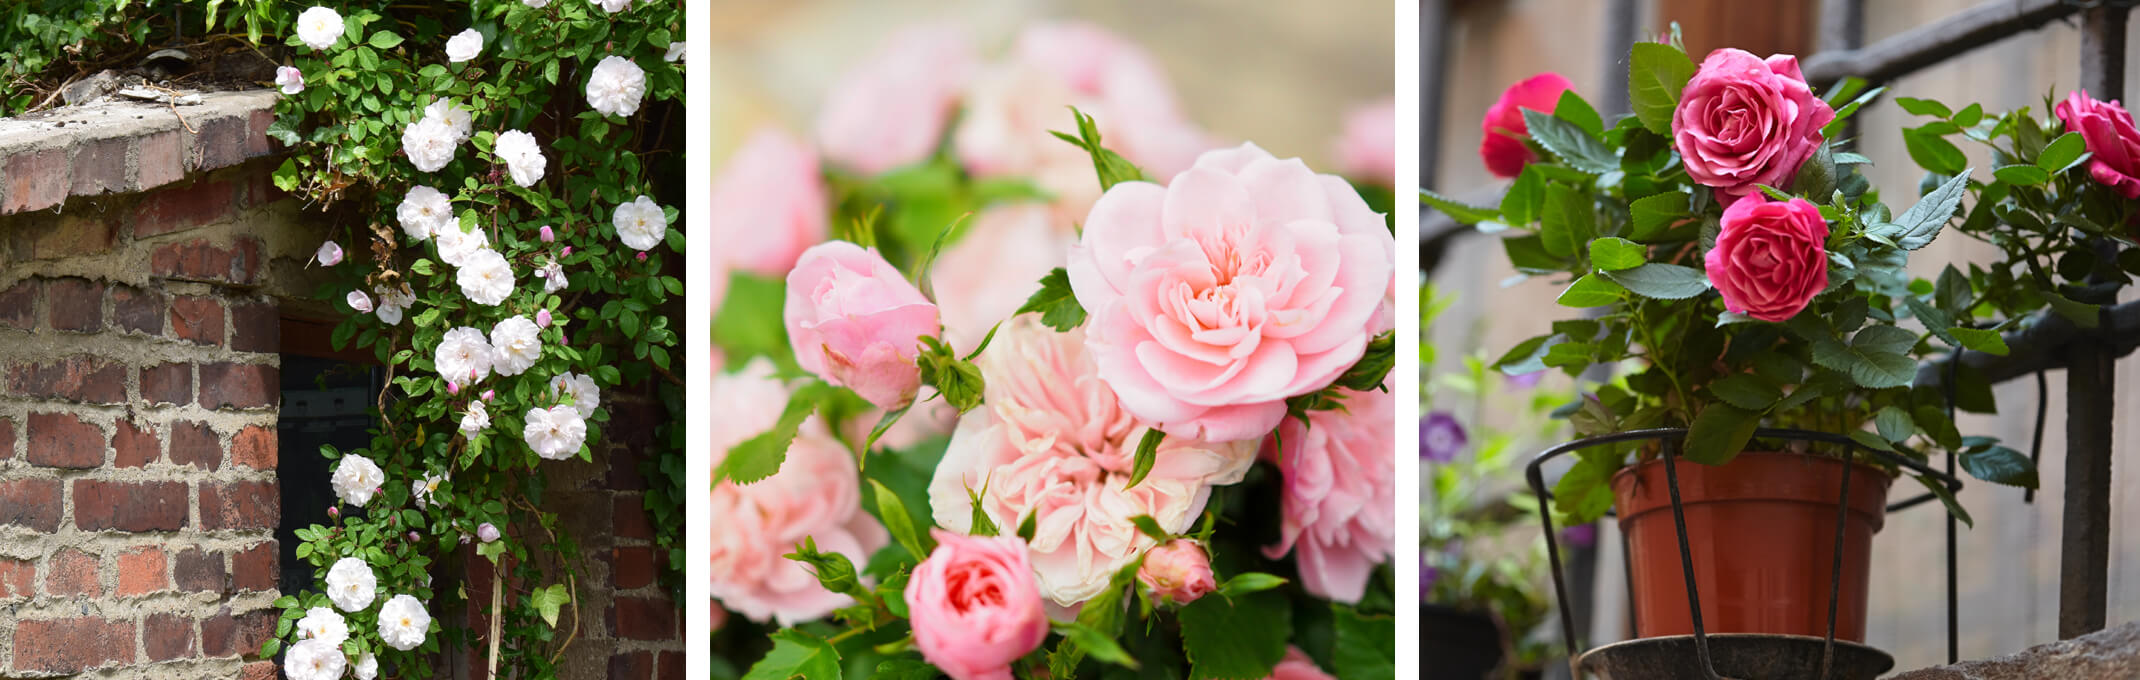 white climbing roses training from a brick wall or entry, pink roses up close and dark pink rose in container sitting in window